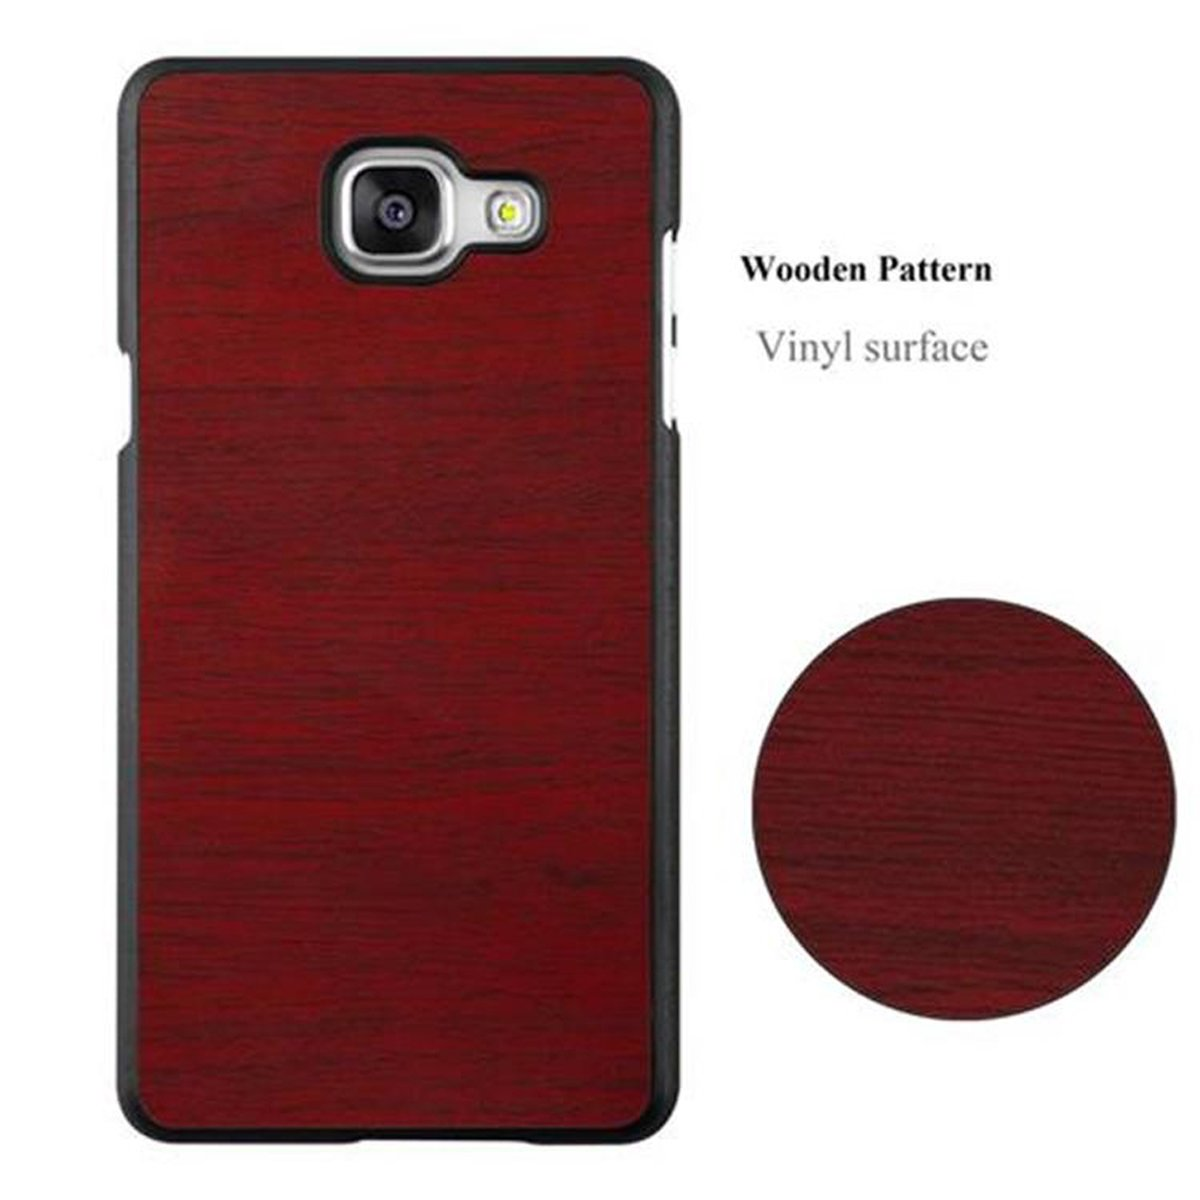 Case ROT Woody Style, A3 Hard Samsung, CADORABO Backcover, WOODY 2016, Hülle Galaxy